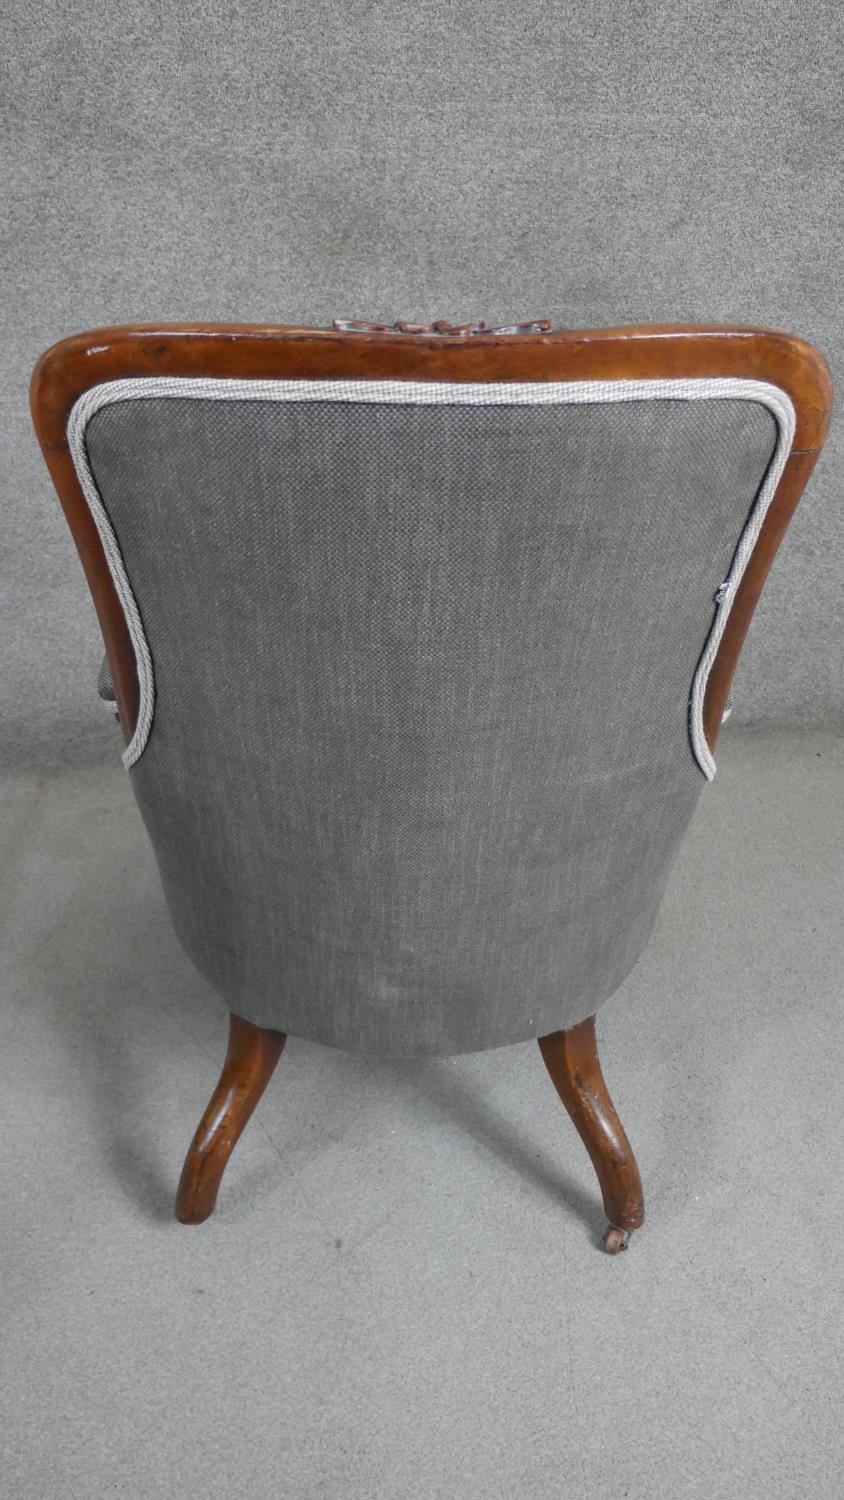 A Victorian walnut open armchair upholstered in grey fabric with a buttoned back over a serpentine - Image 5 of 5